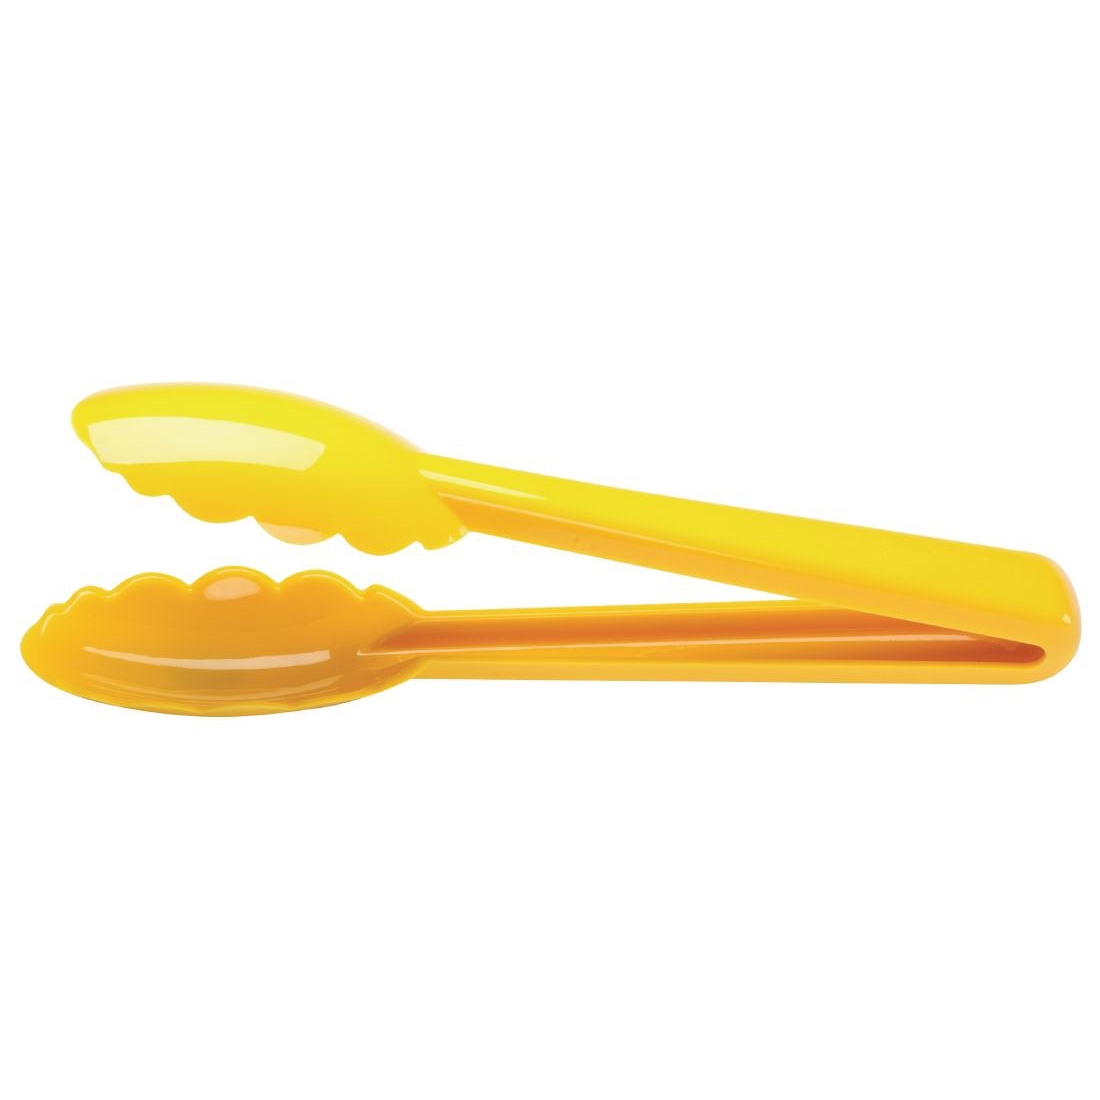 Mercer Culinary Hells Tools Tongs Yellow 8in